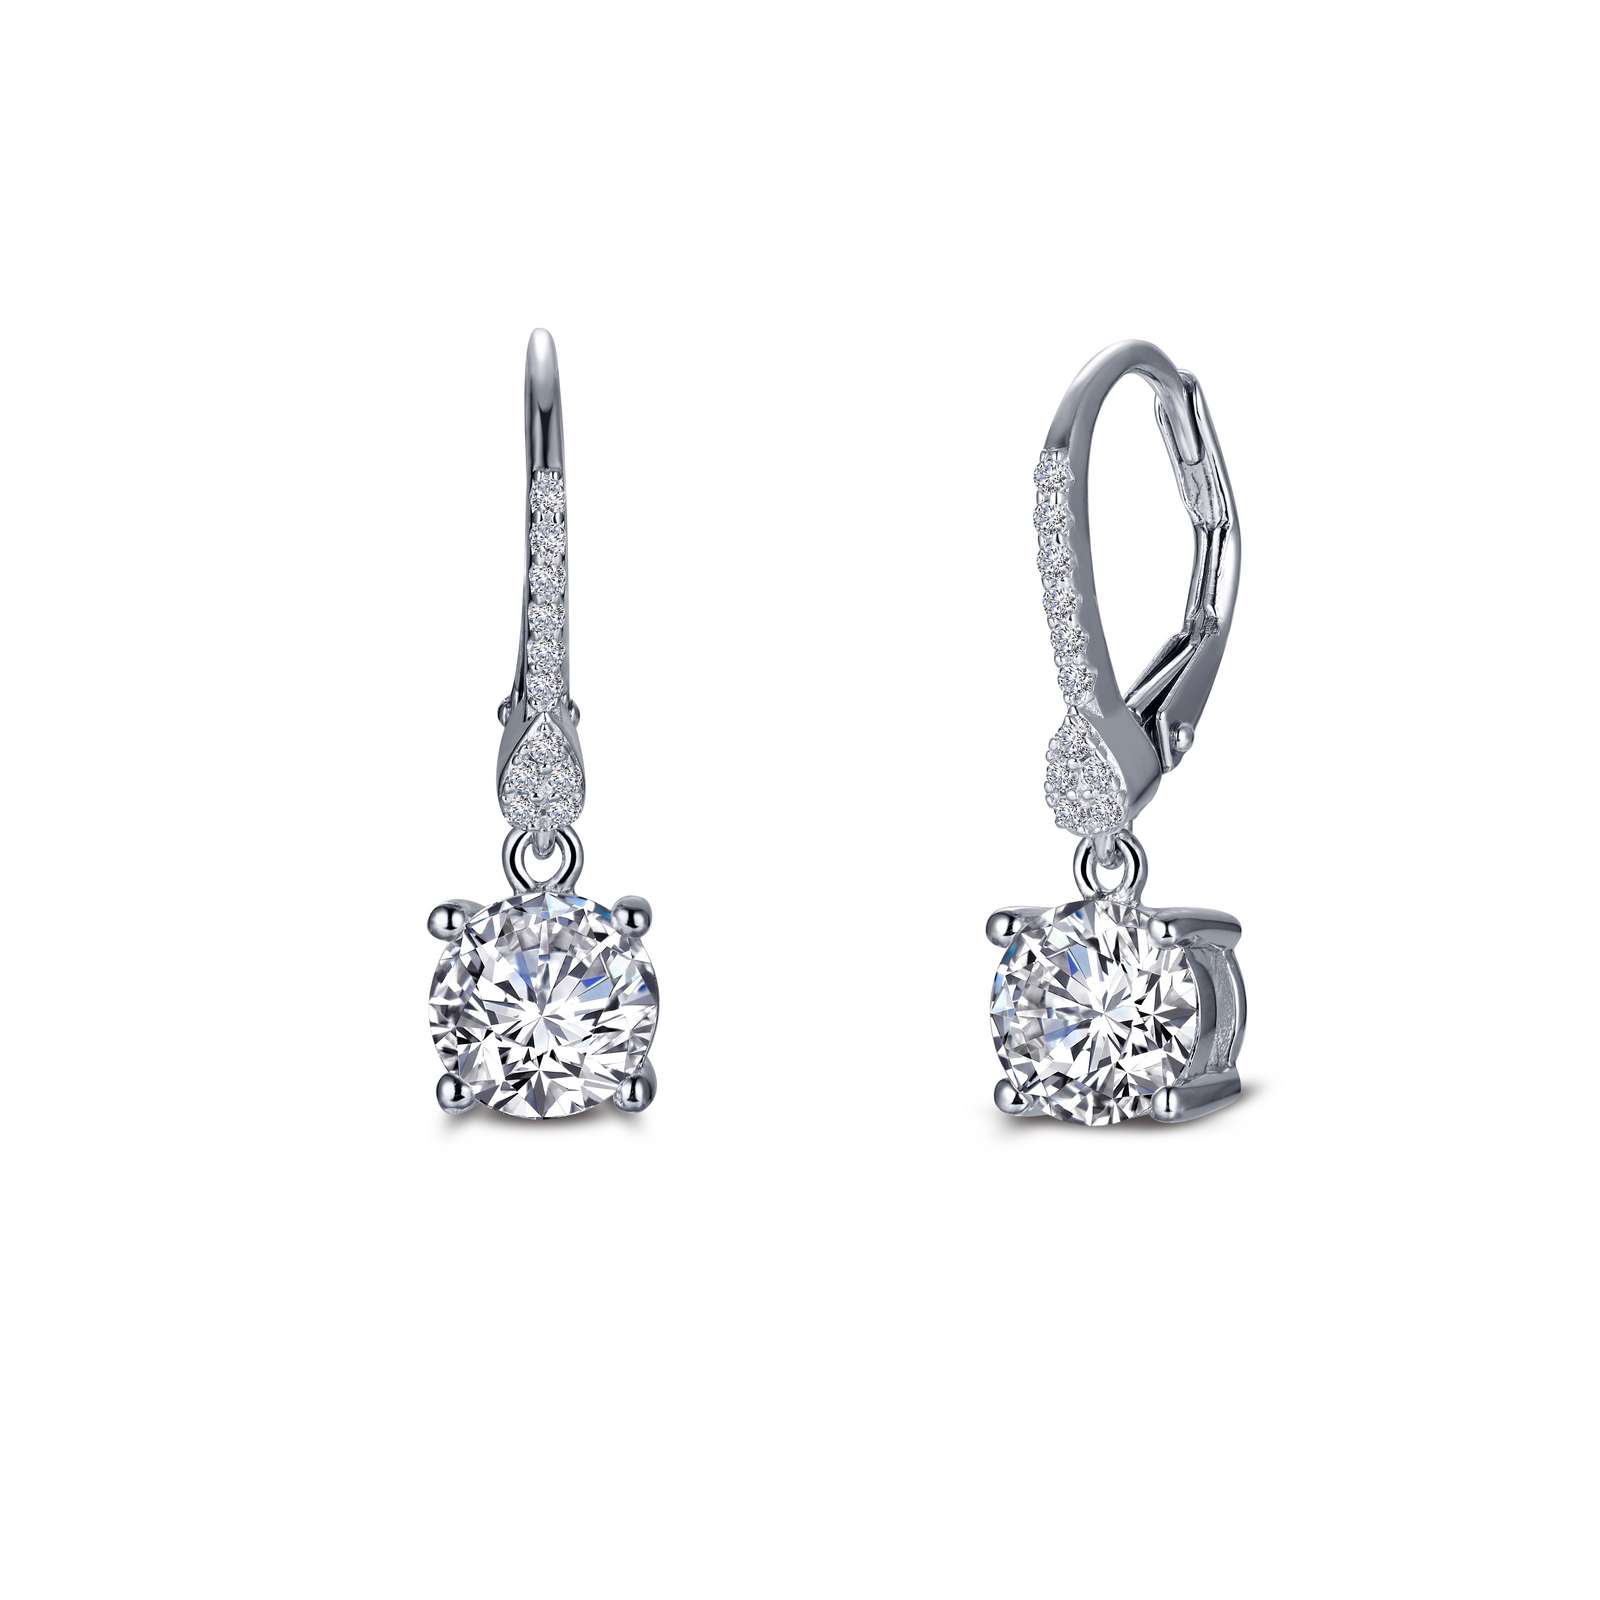 Leverback Solitaire Drop Earrings Griner Jewelry Co. Moultrie, GA